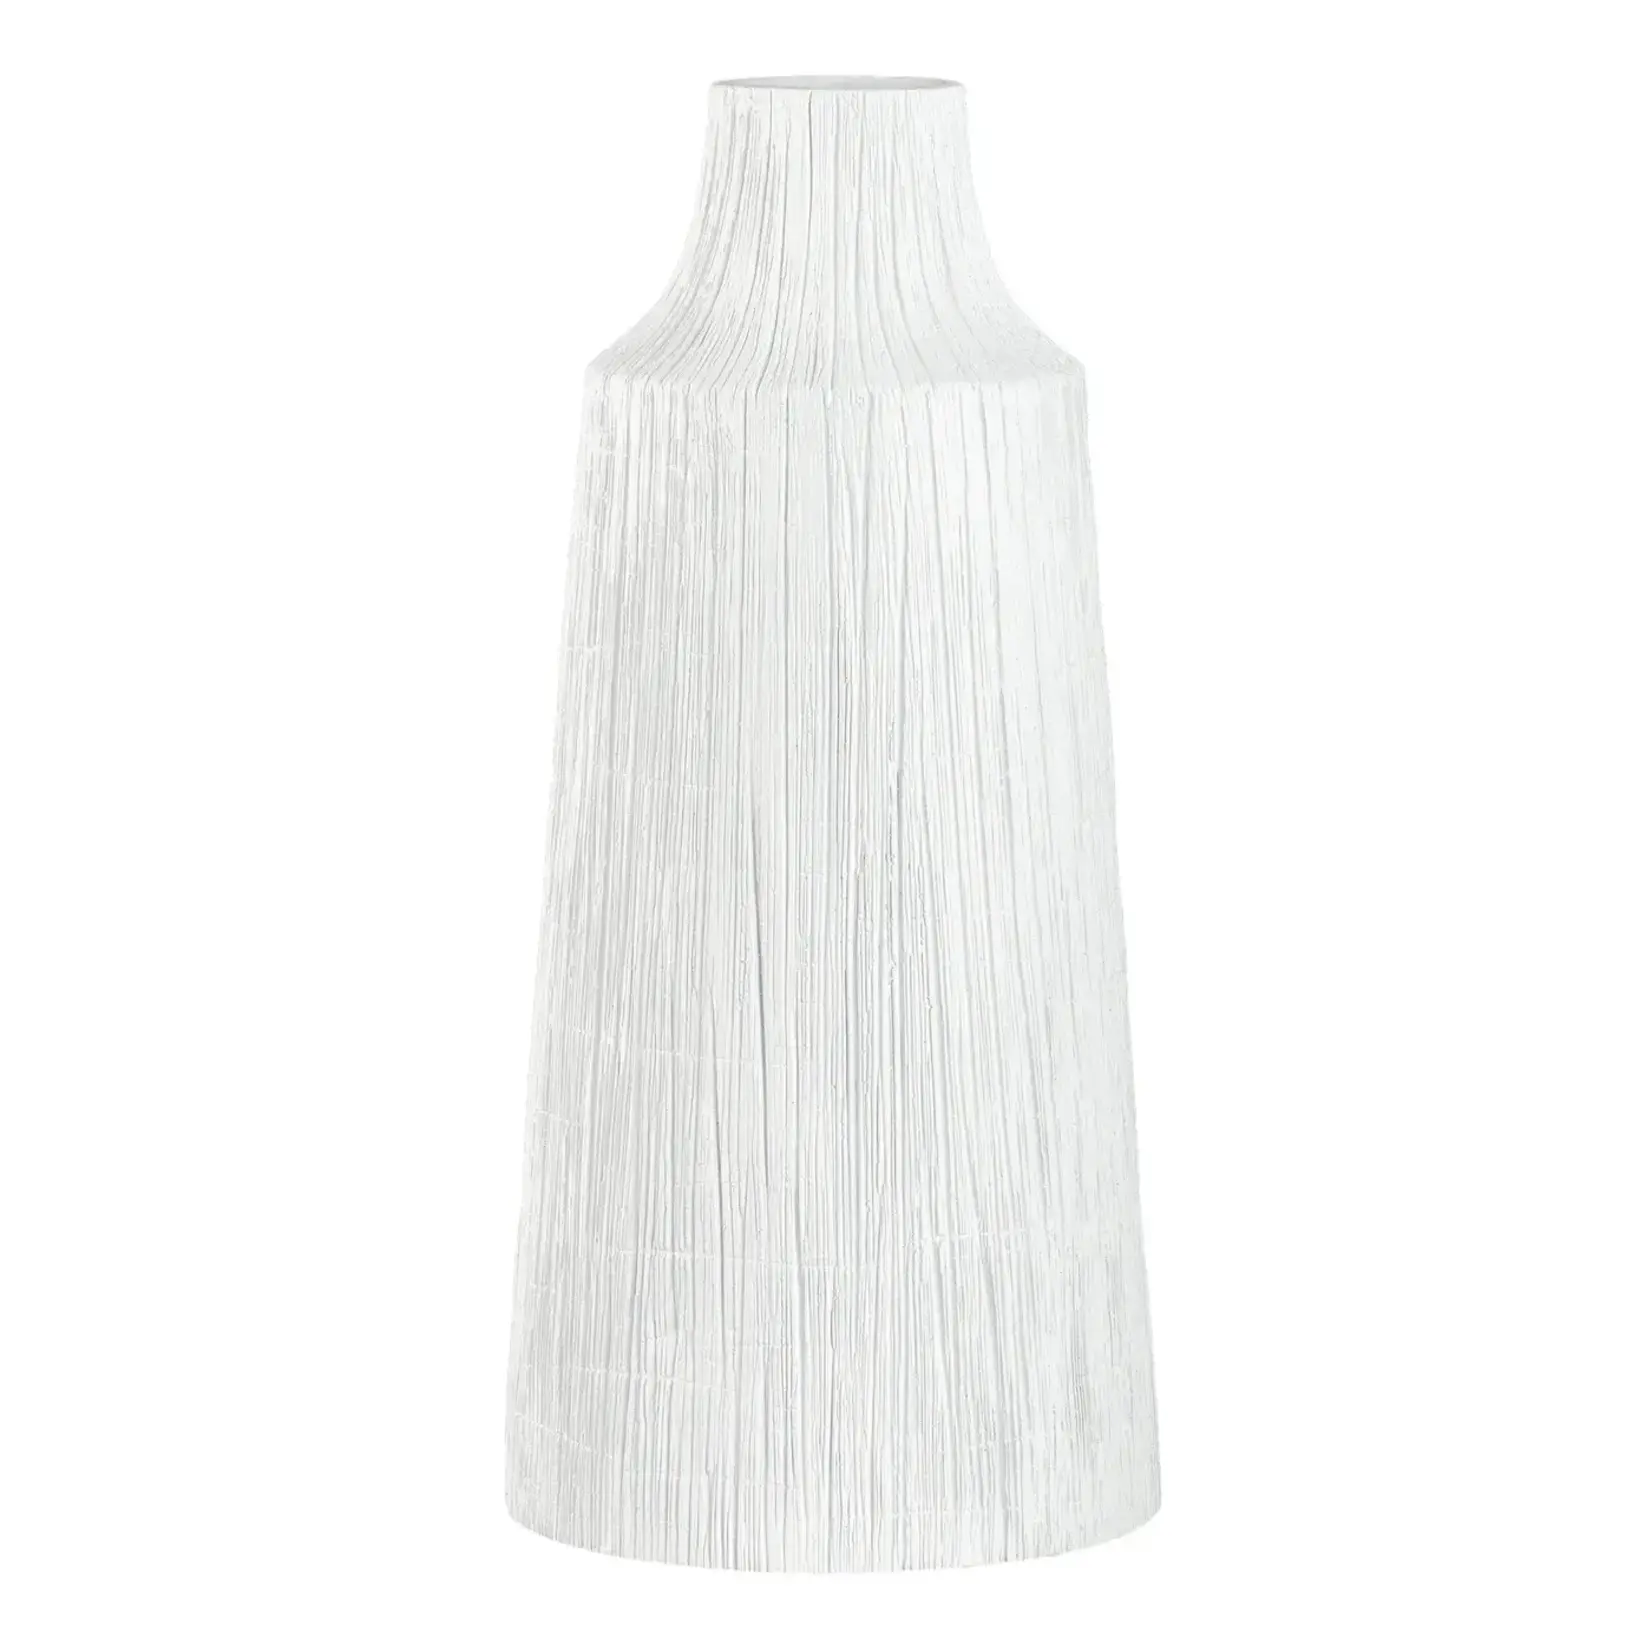 Torre & Tagus Petra White Etched Vae - 16"